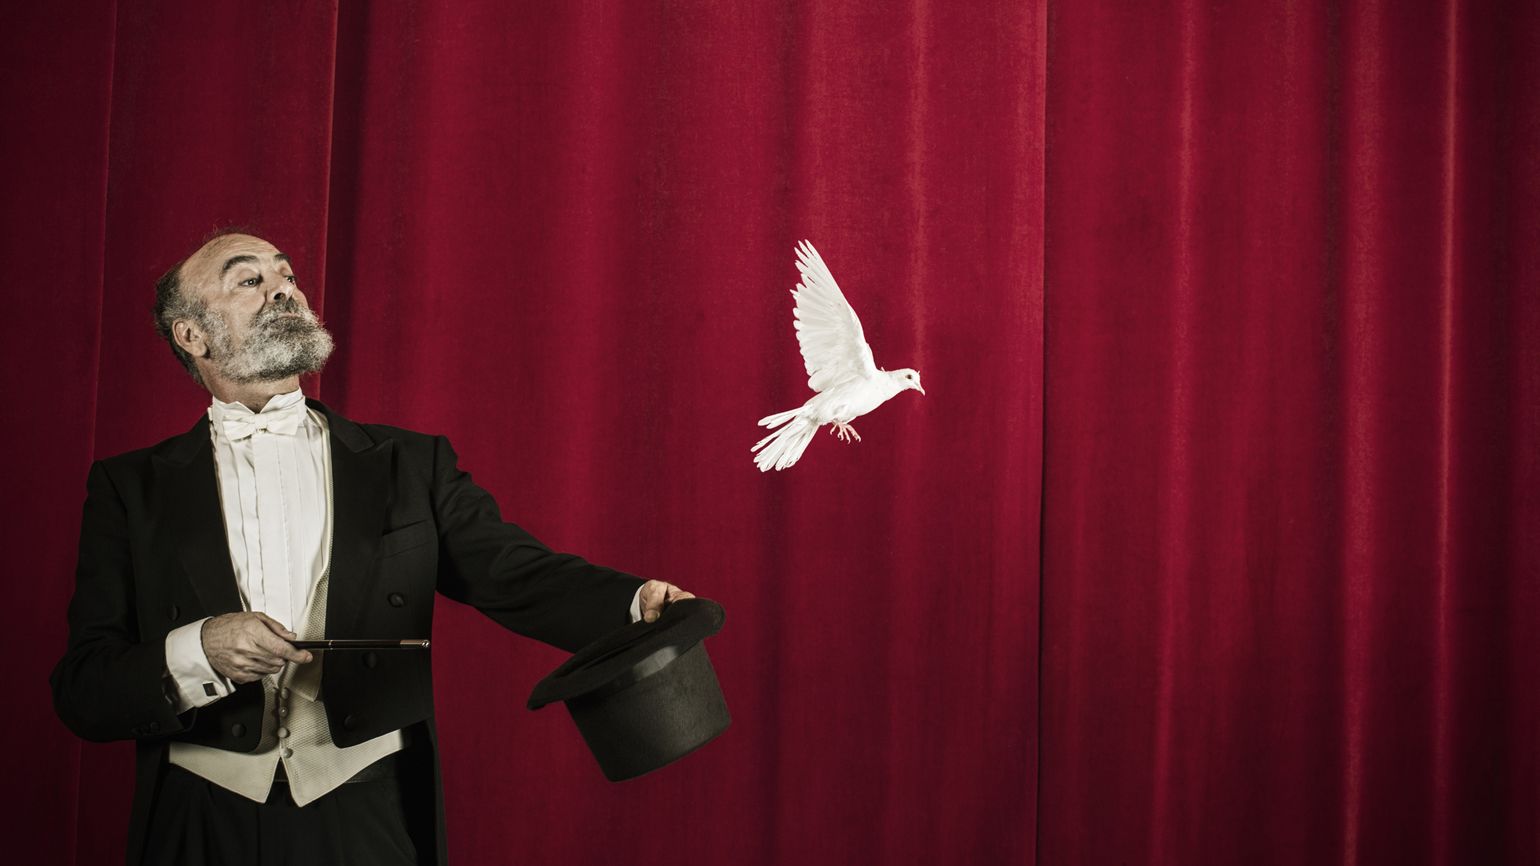 Magician performing stage magic with doves.